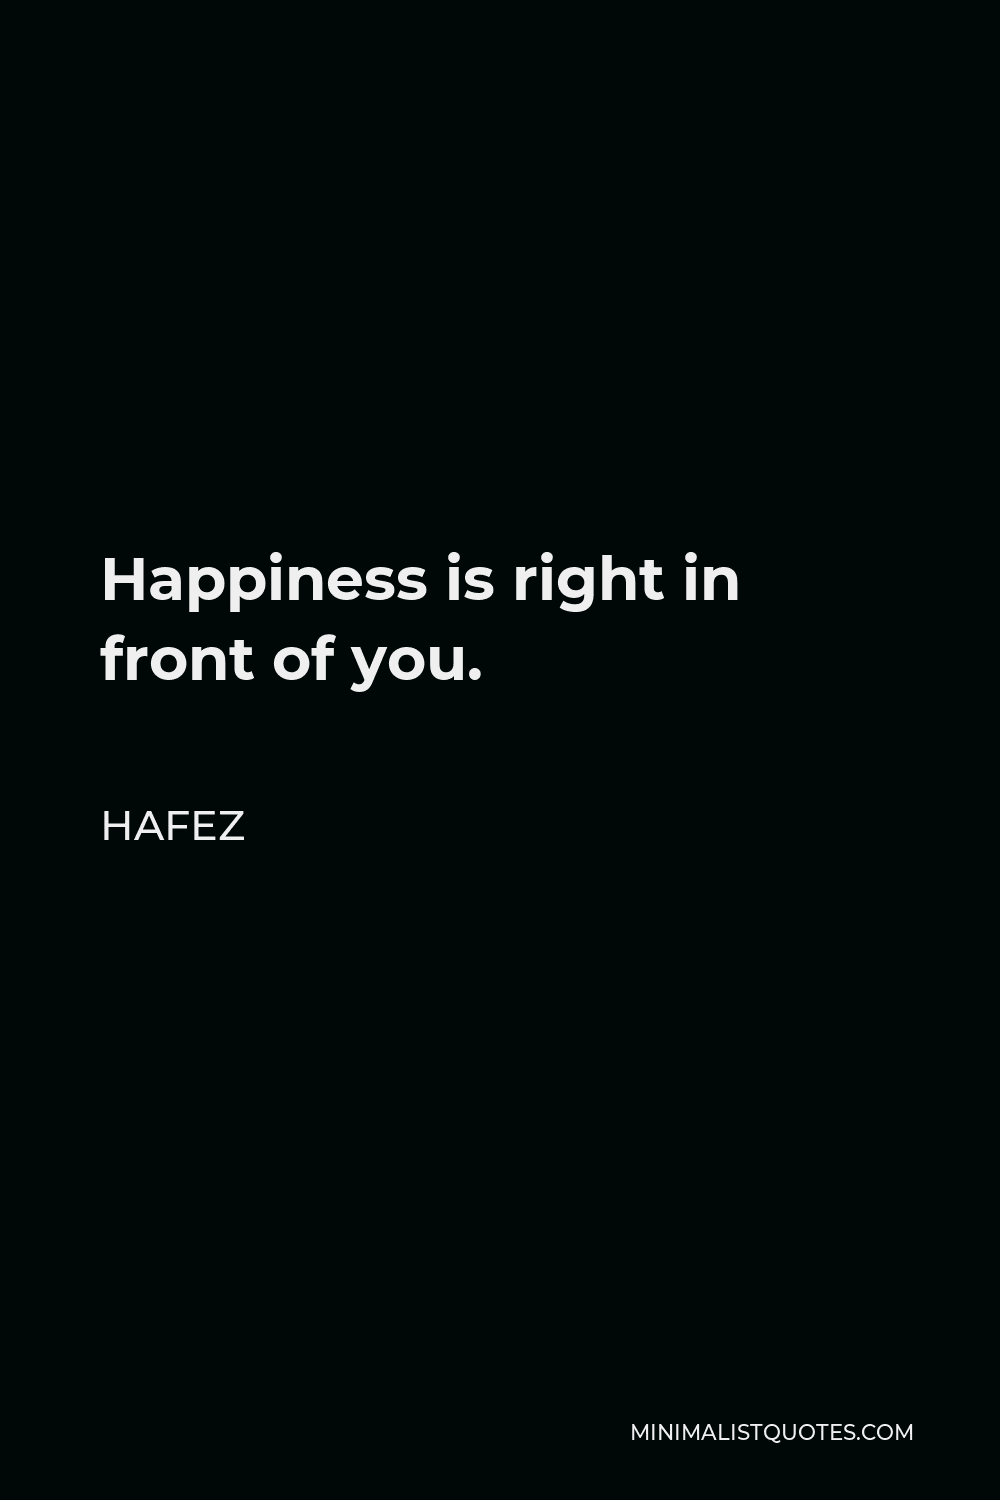 Hafez Quote - Happiness is right in front of you.